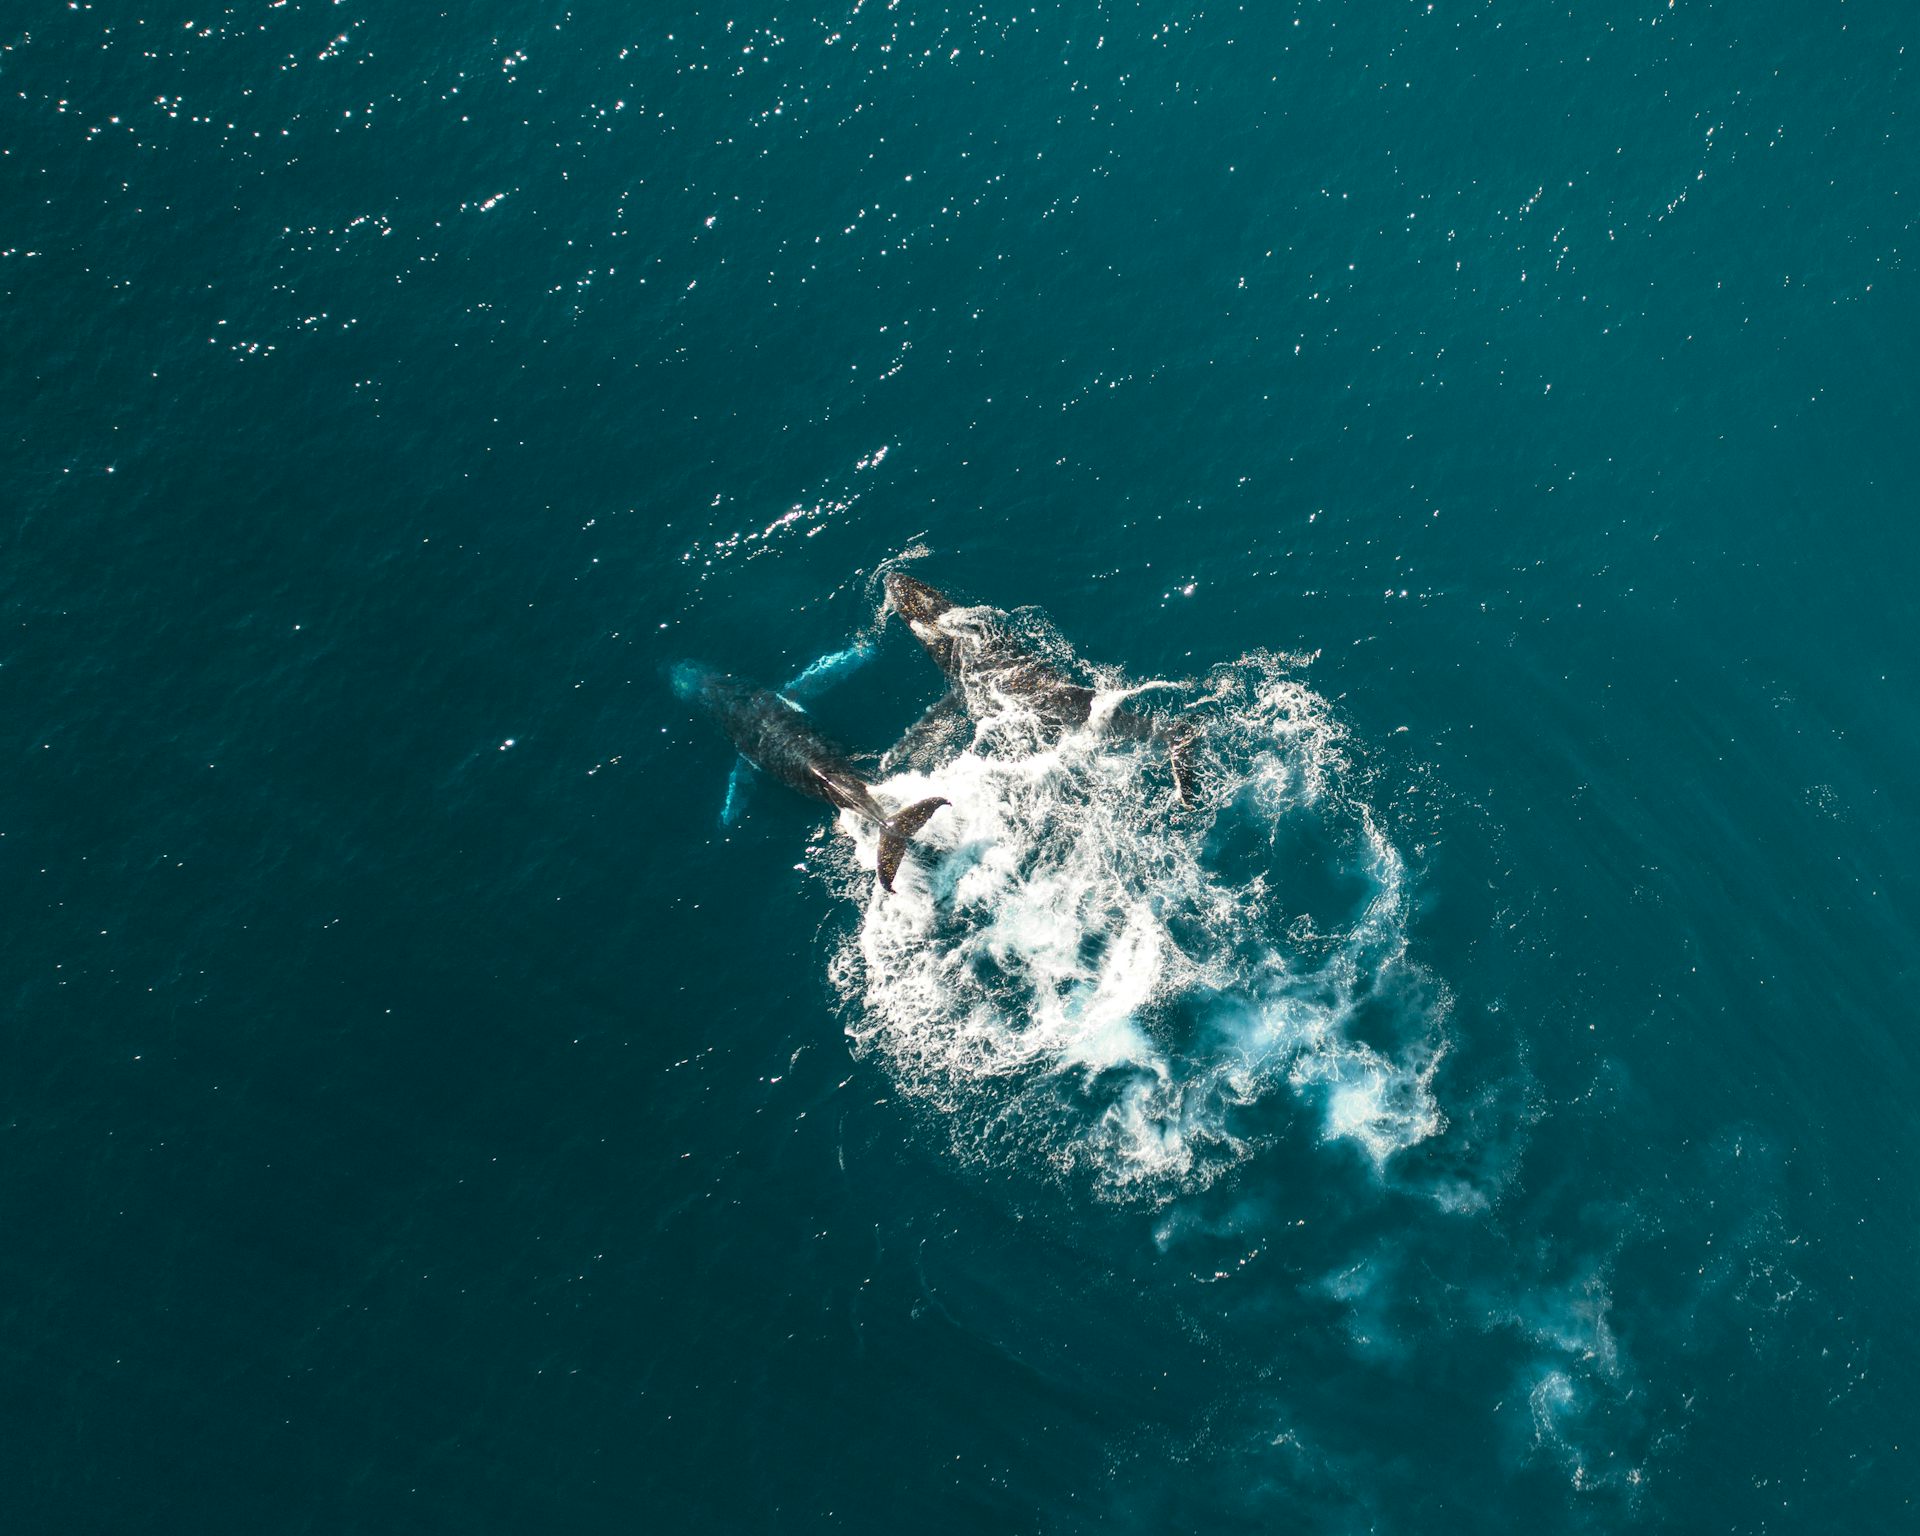 An aerial view of two humpback whales swimming in the ocean